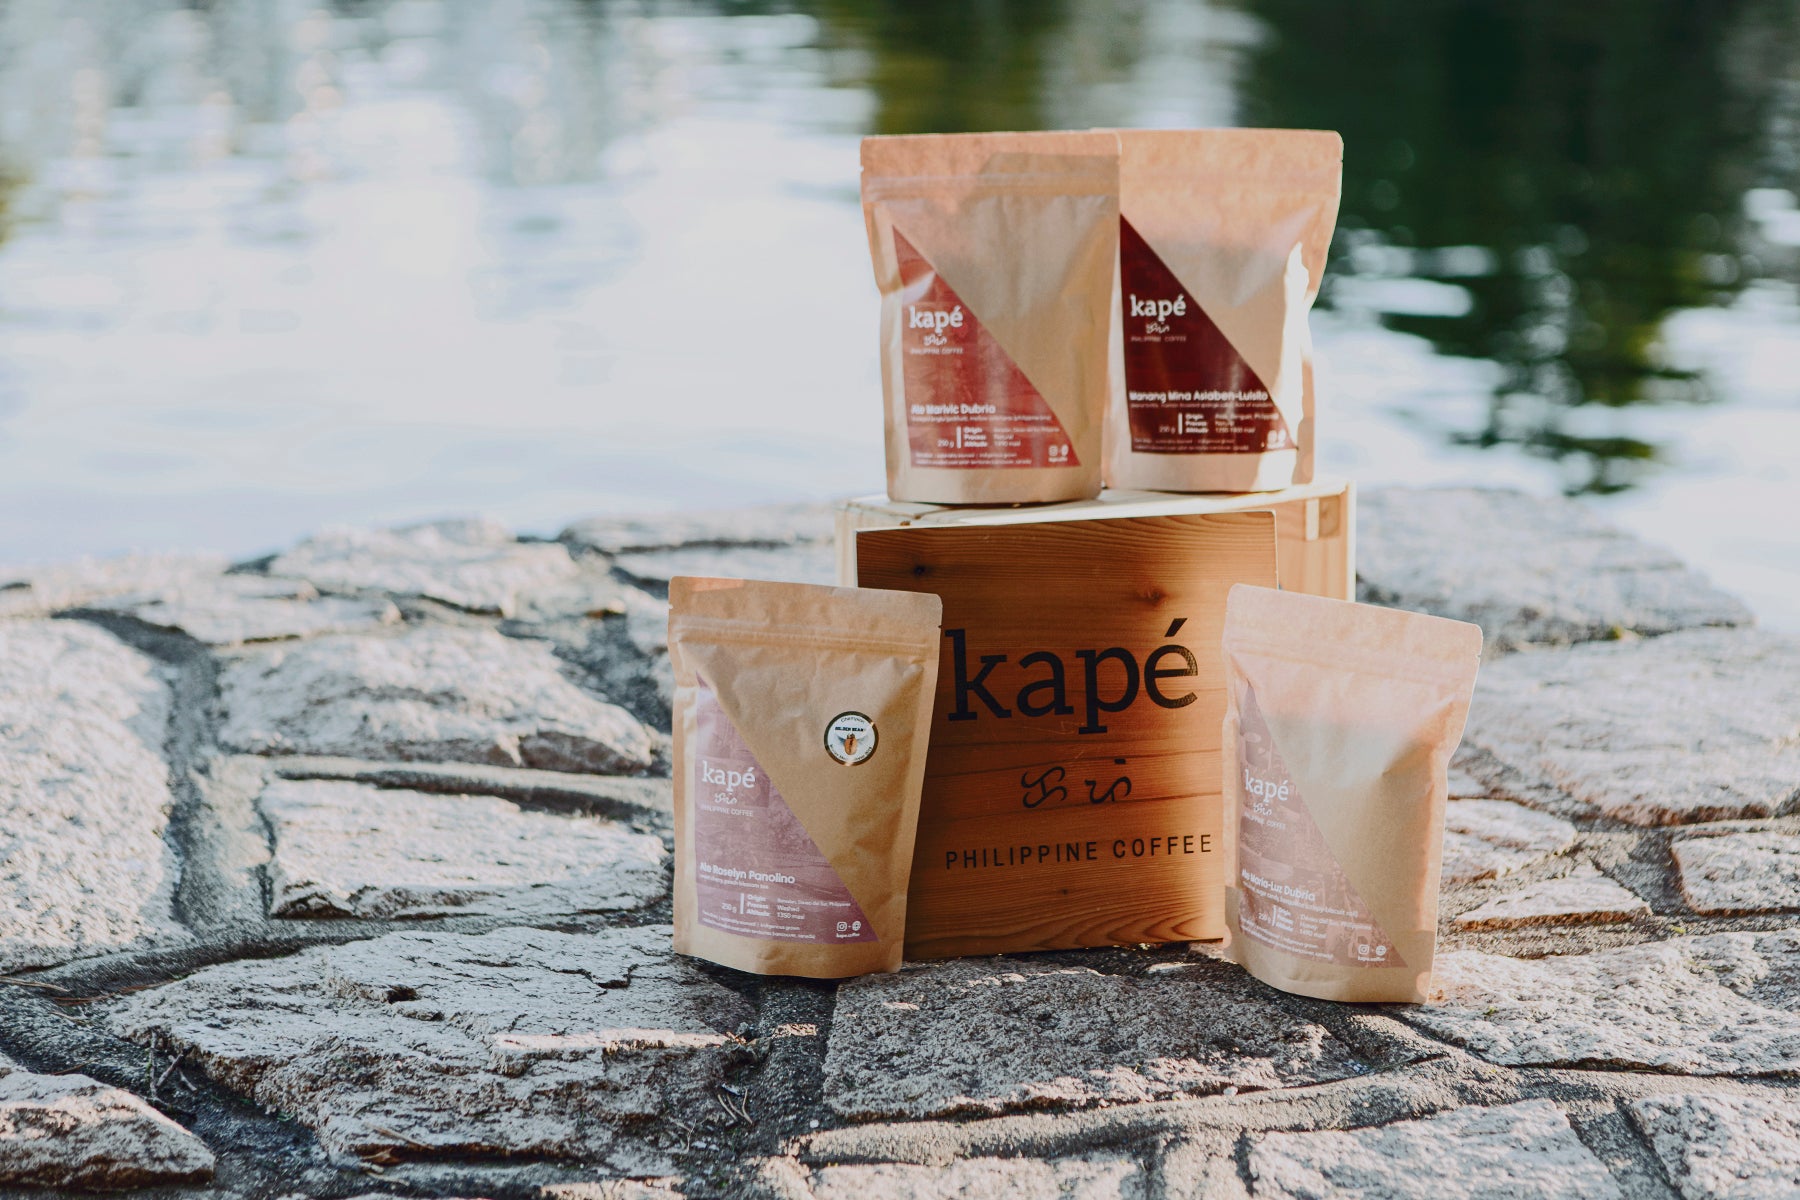 Bags of Kapé Philippine Coffee surround a wooden block by the water. Photo by Issha.